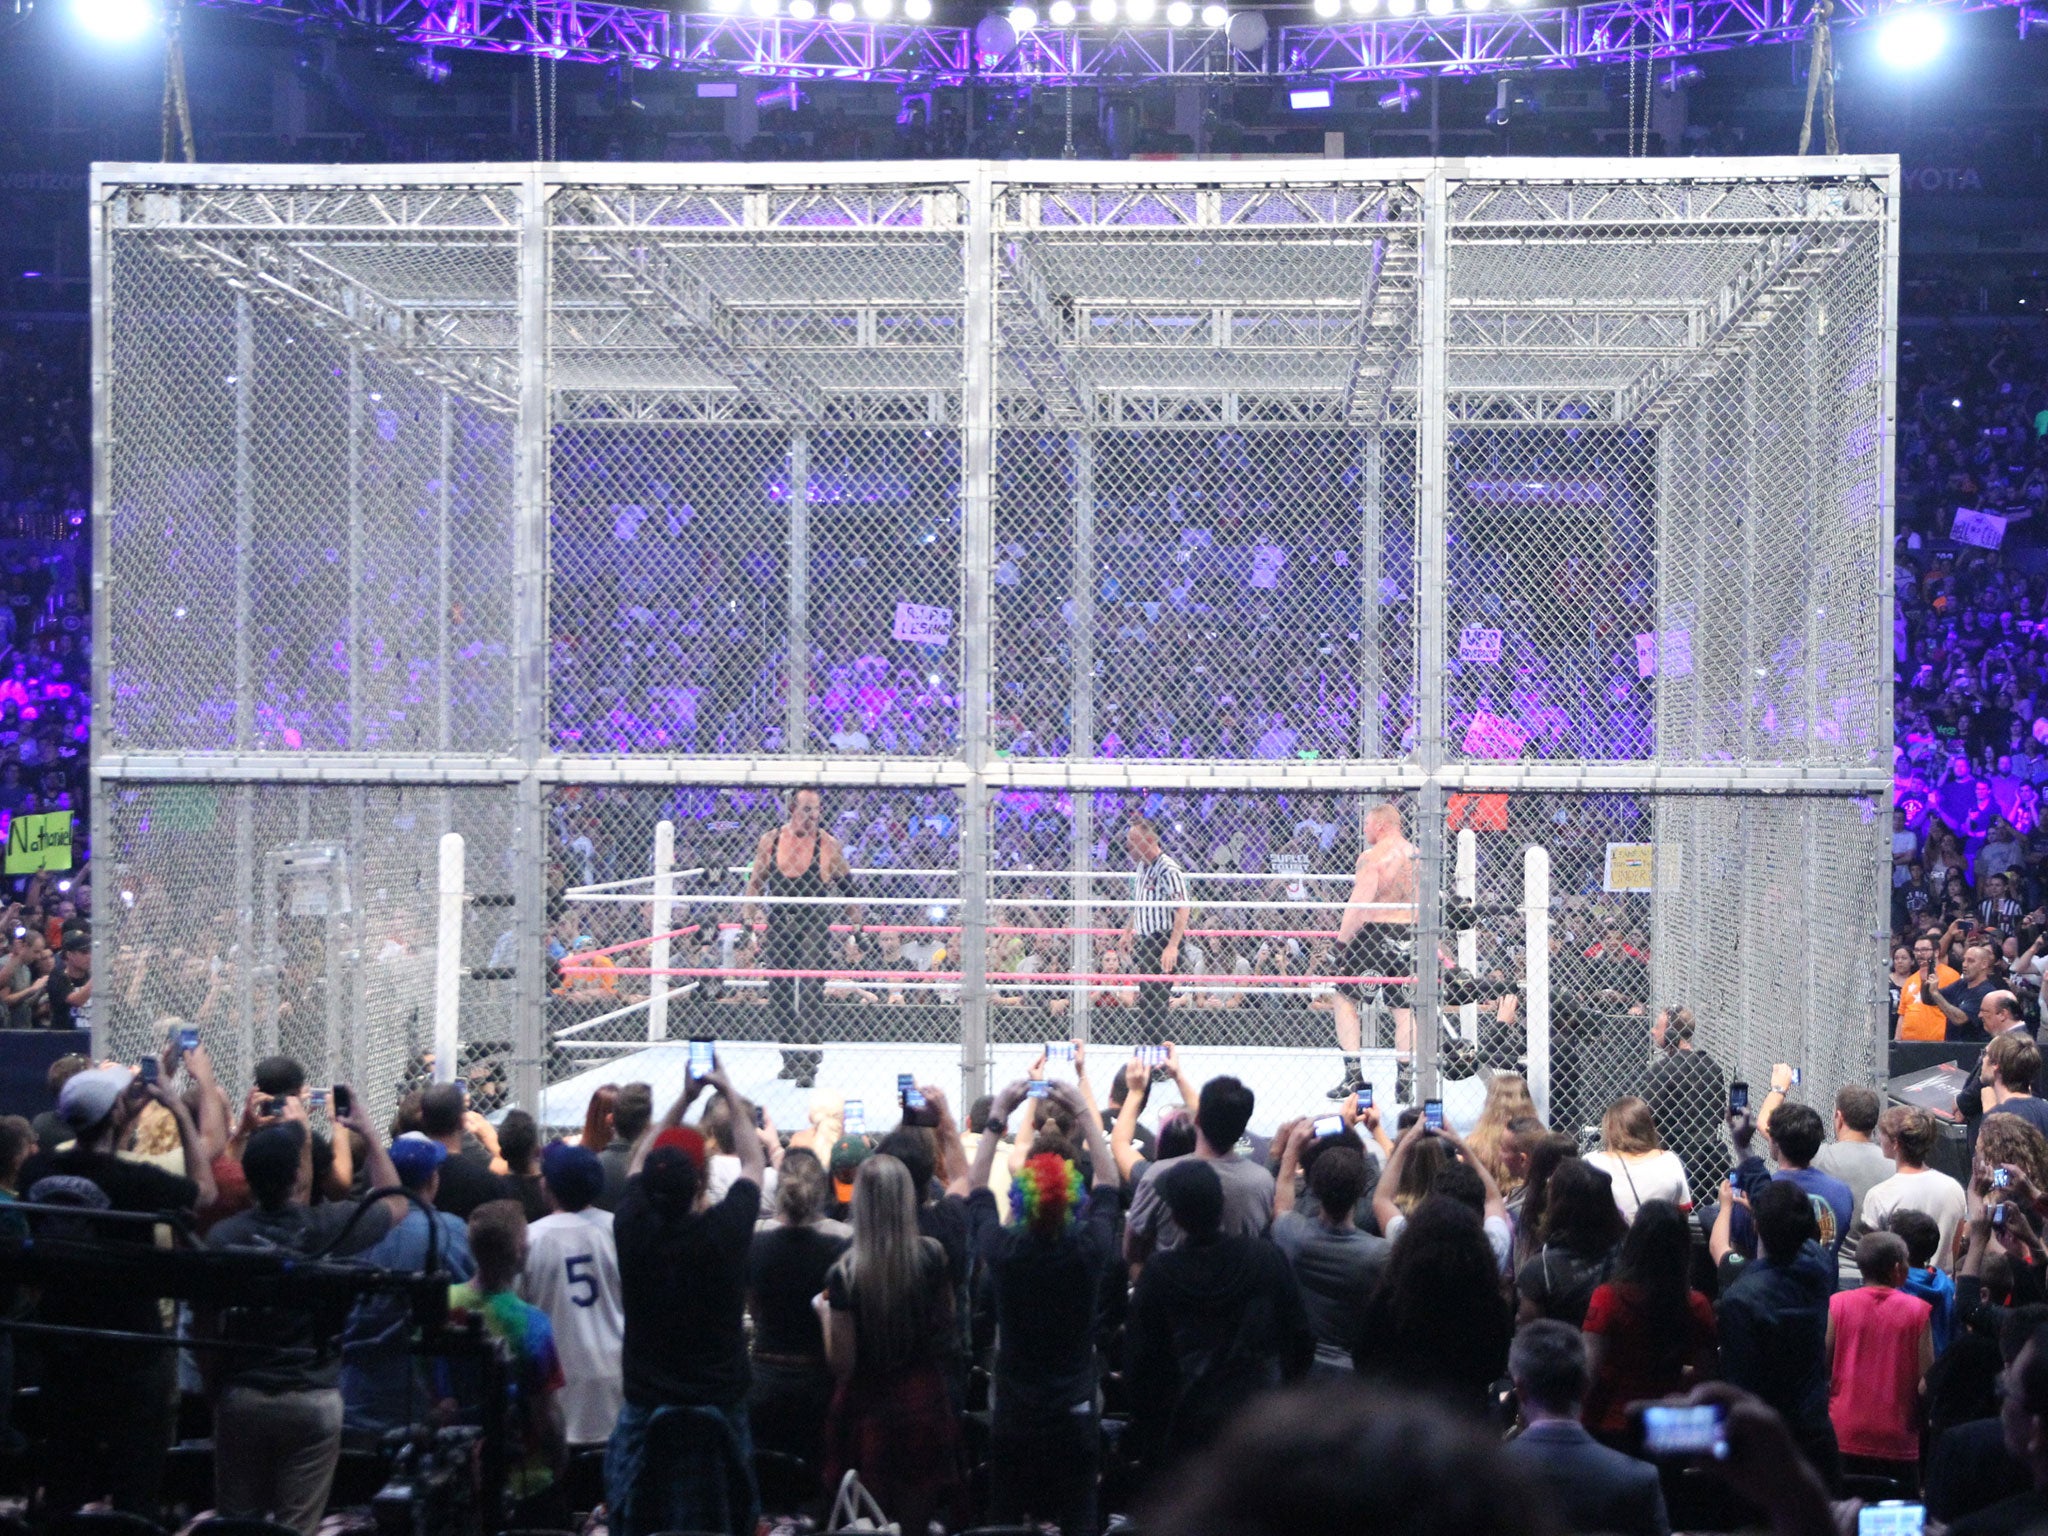 The daunting Hell in a Cell cage